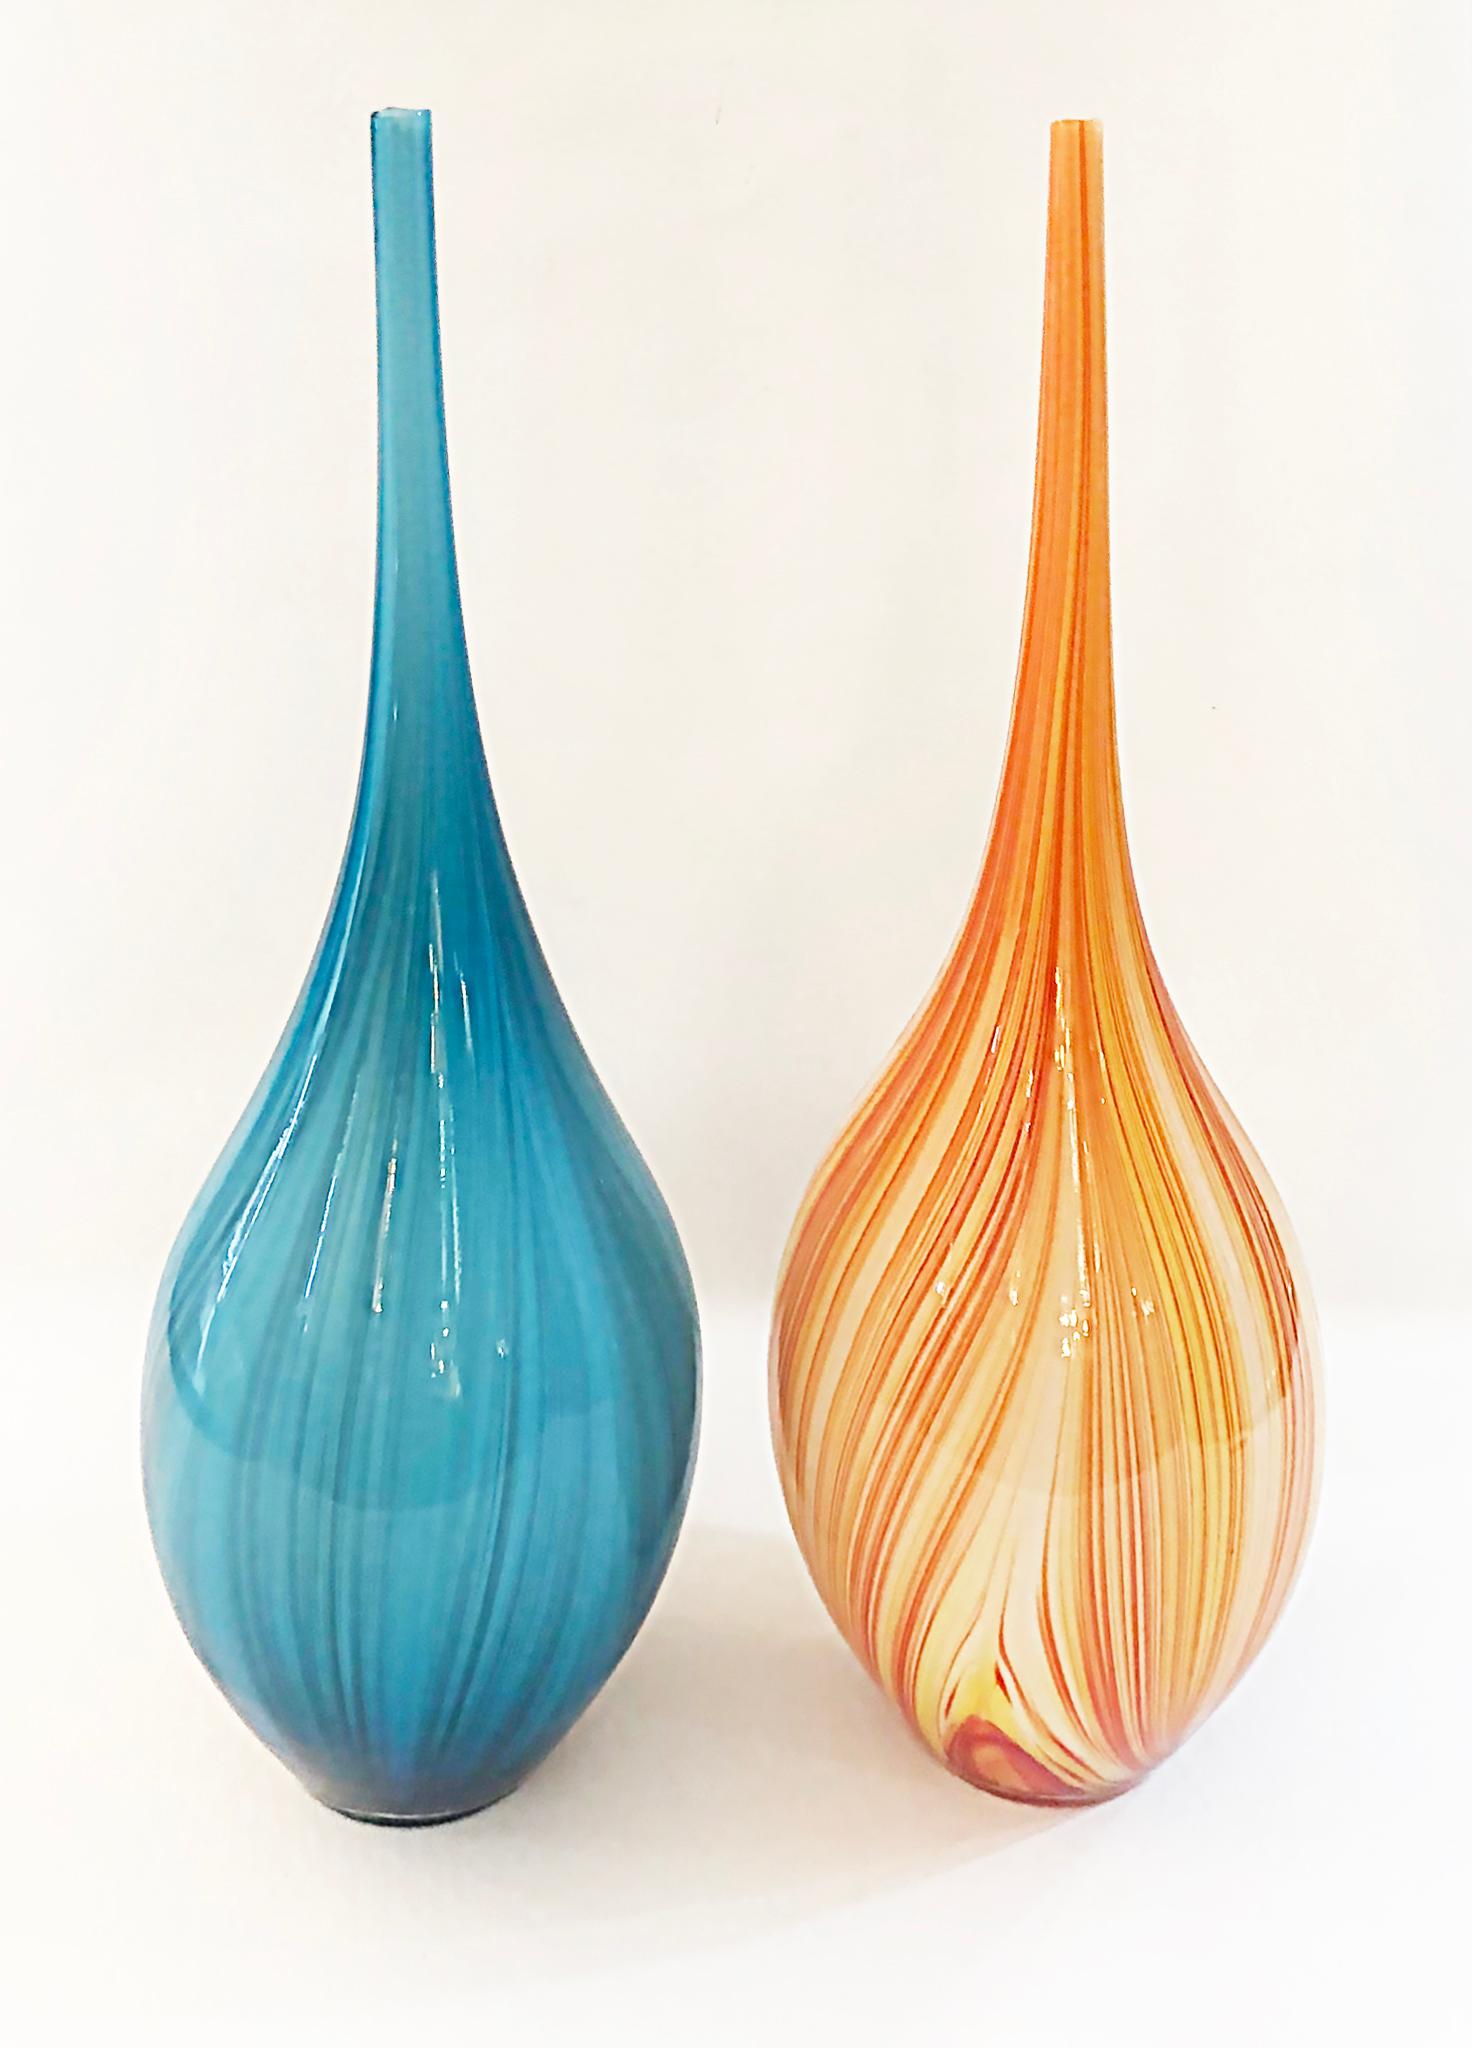 Vintage Elongated tall blown glass vases with Bulbous Bases in Blue and Amber

Offered for sale is a pair of elongated tall blown glass vases with bulbous bases. The vases are in blue and amber.